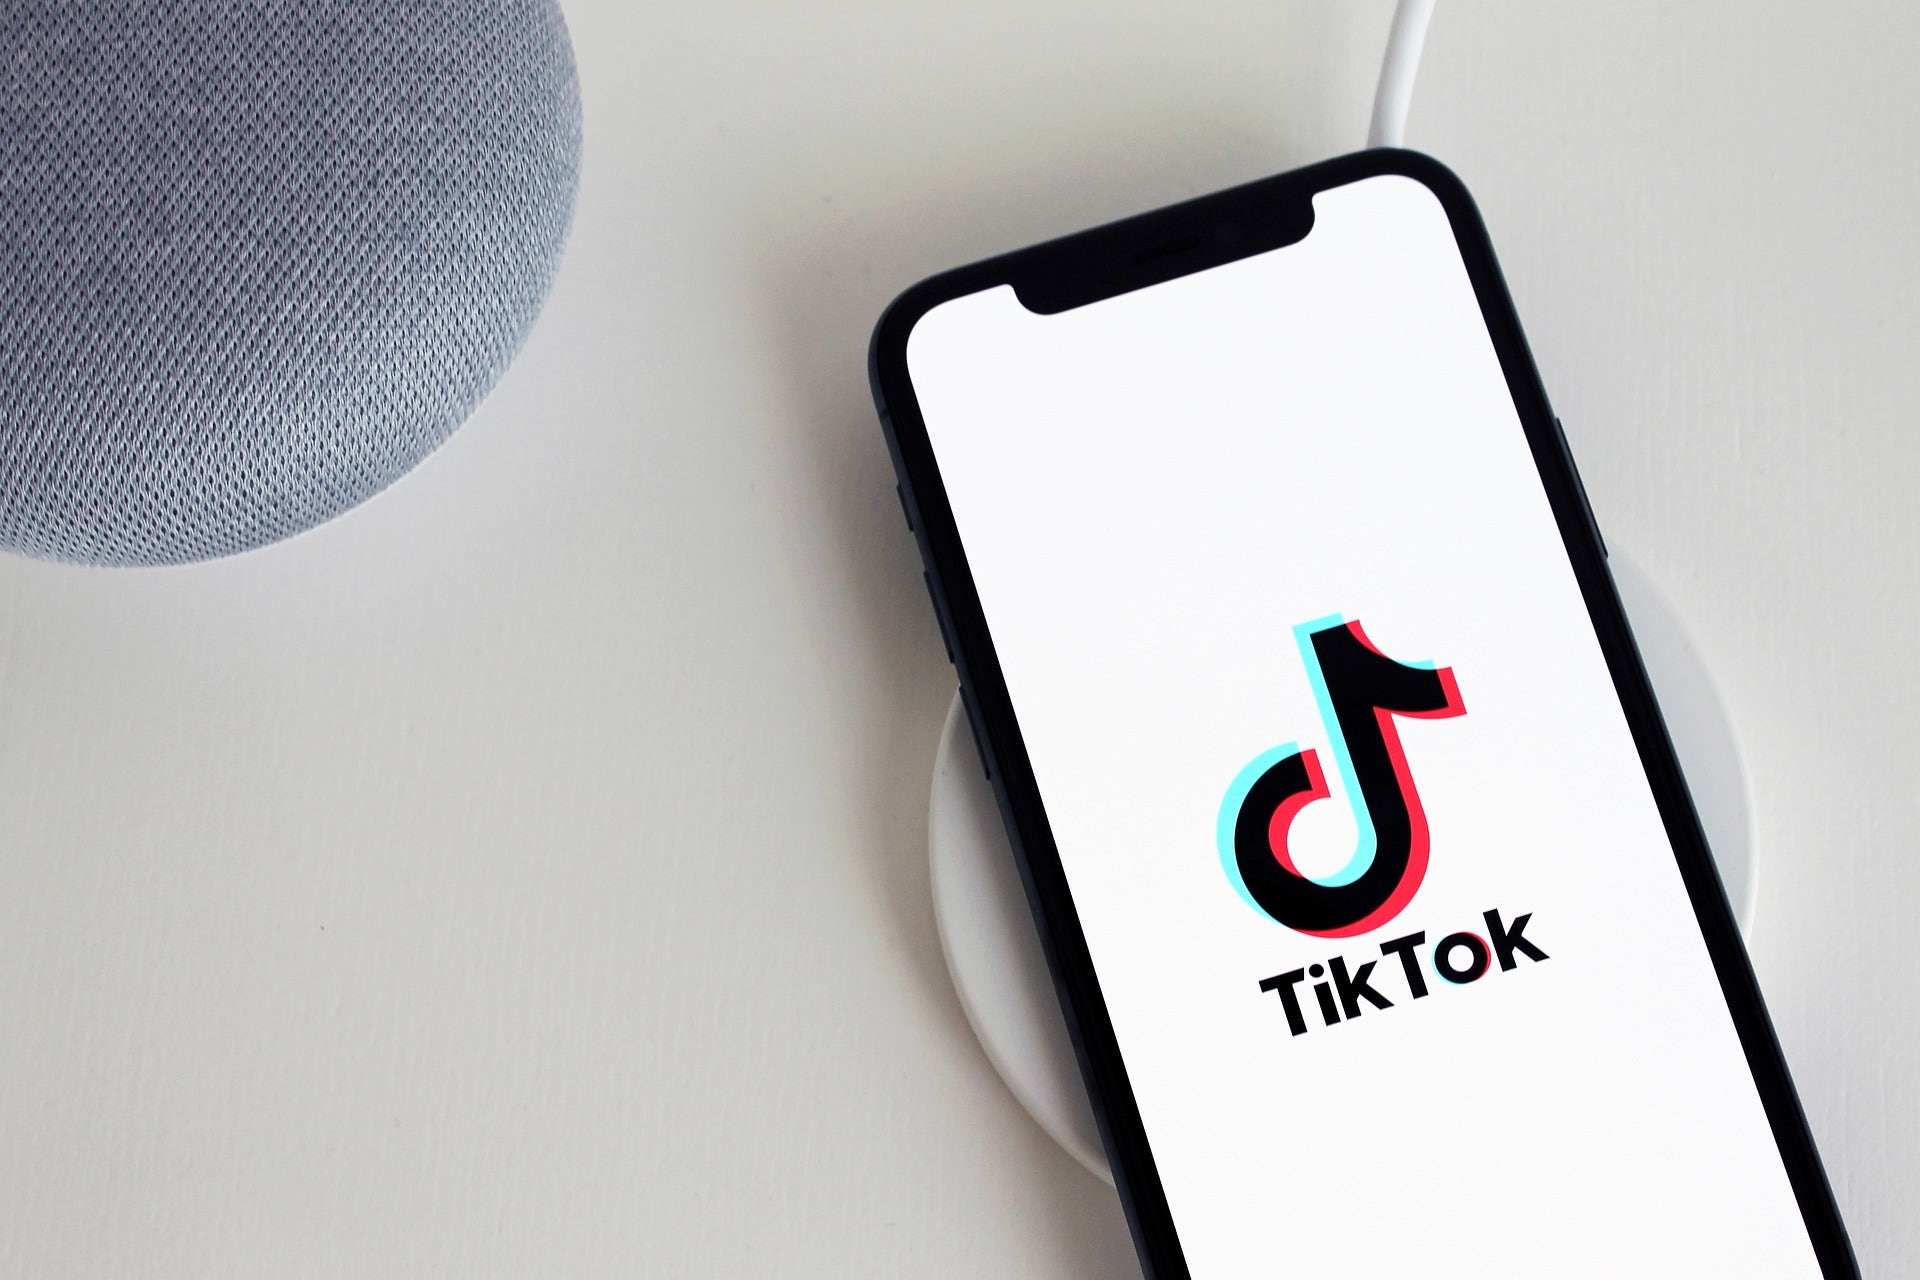 How Kevin Mayer 'Was Snubbed' At Disney And Has A Lot To Prove At TikTok